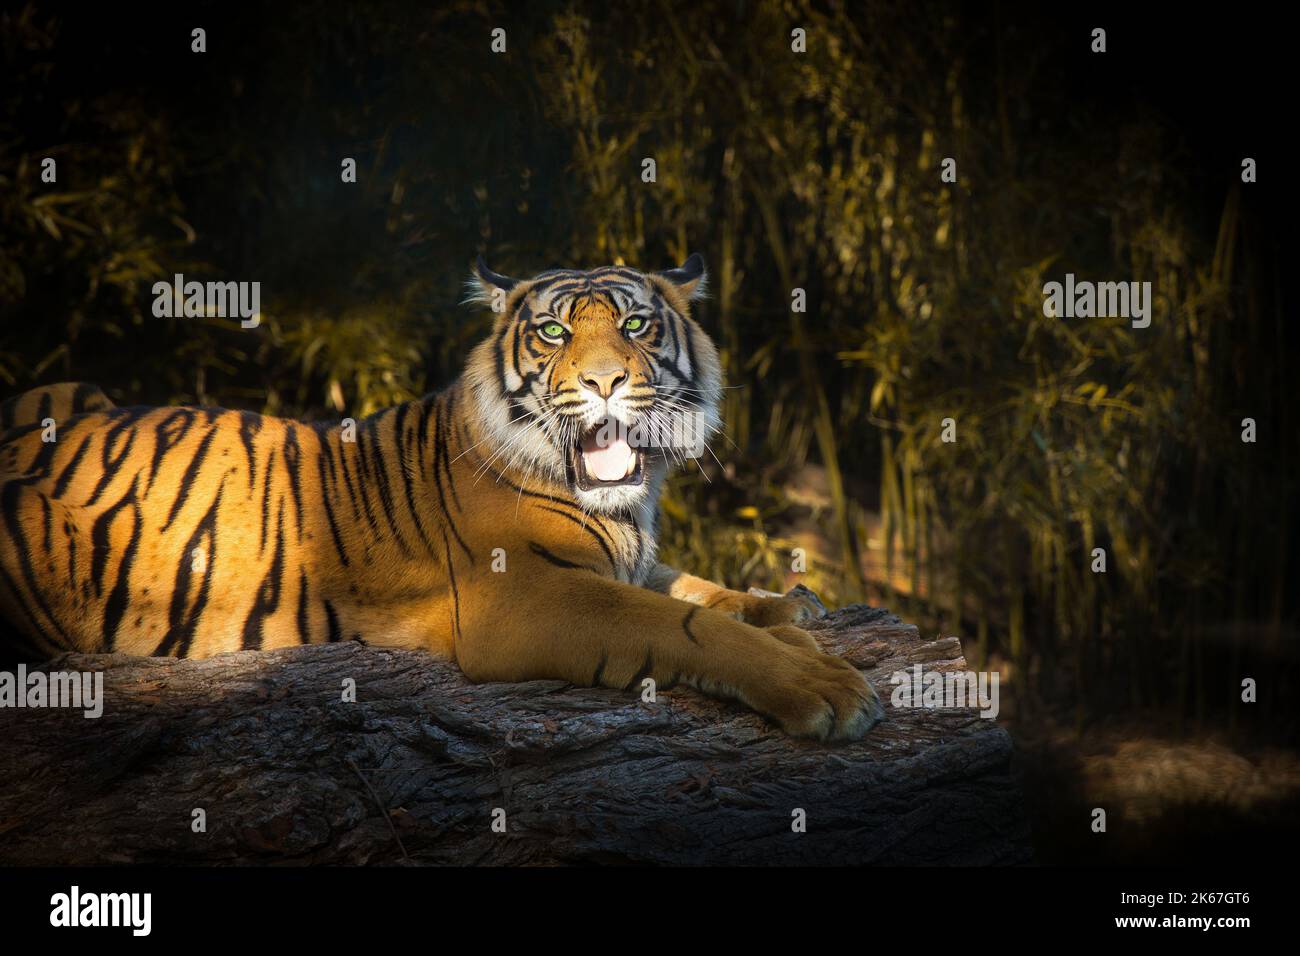 A closeup of a tiger (Panthera tigris) lying on a tree trunk on a natural background Stock Photo